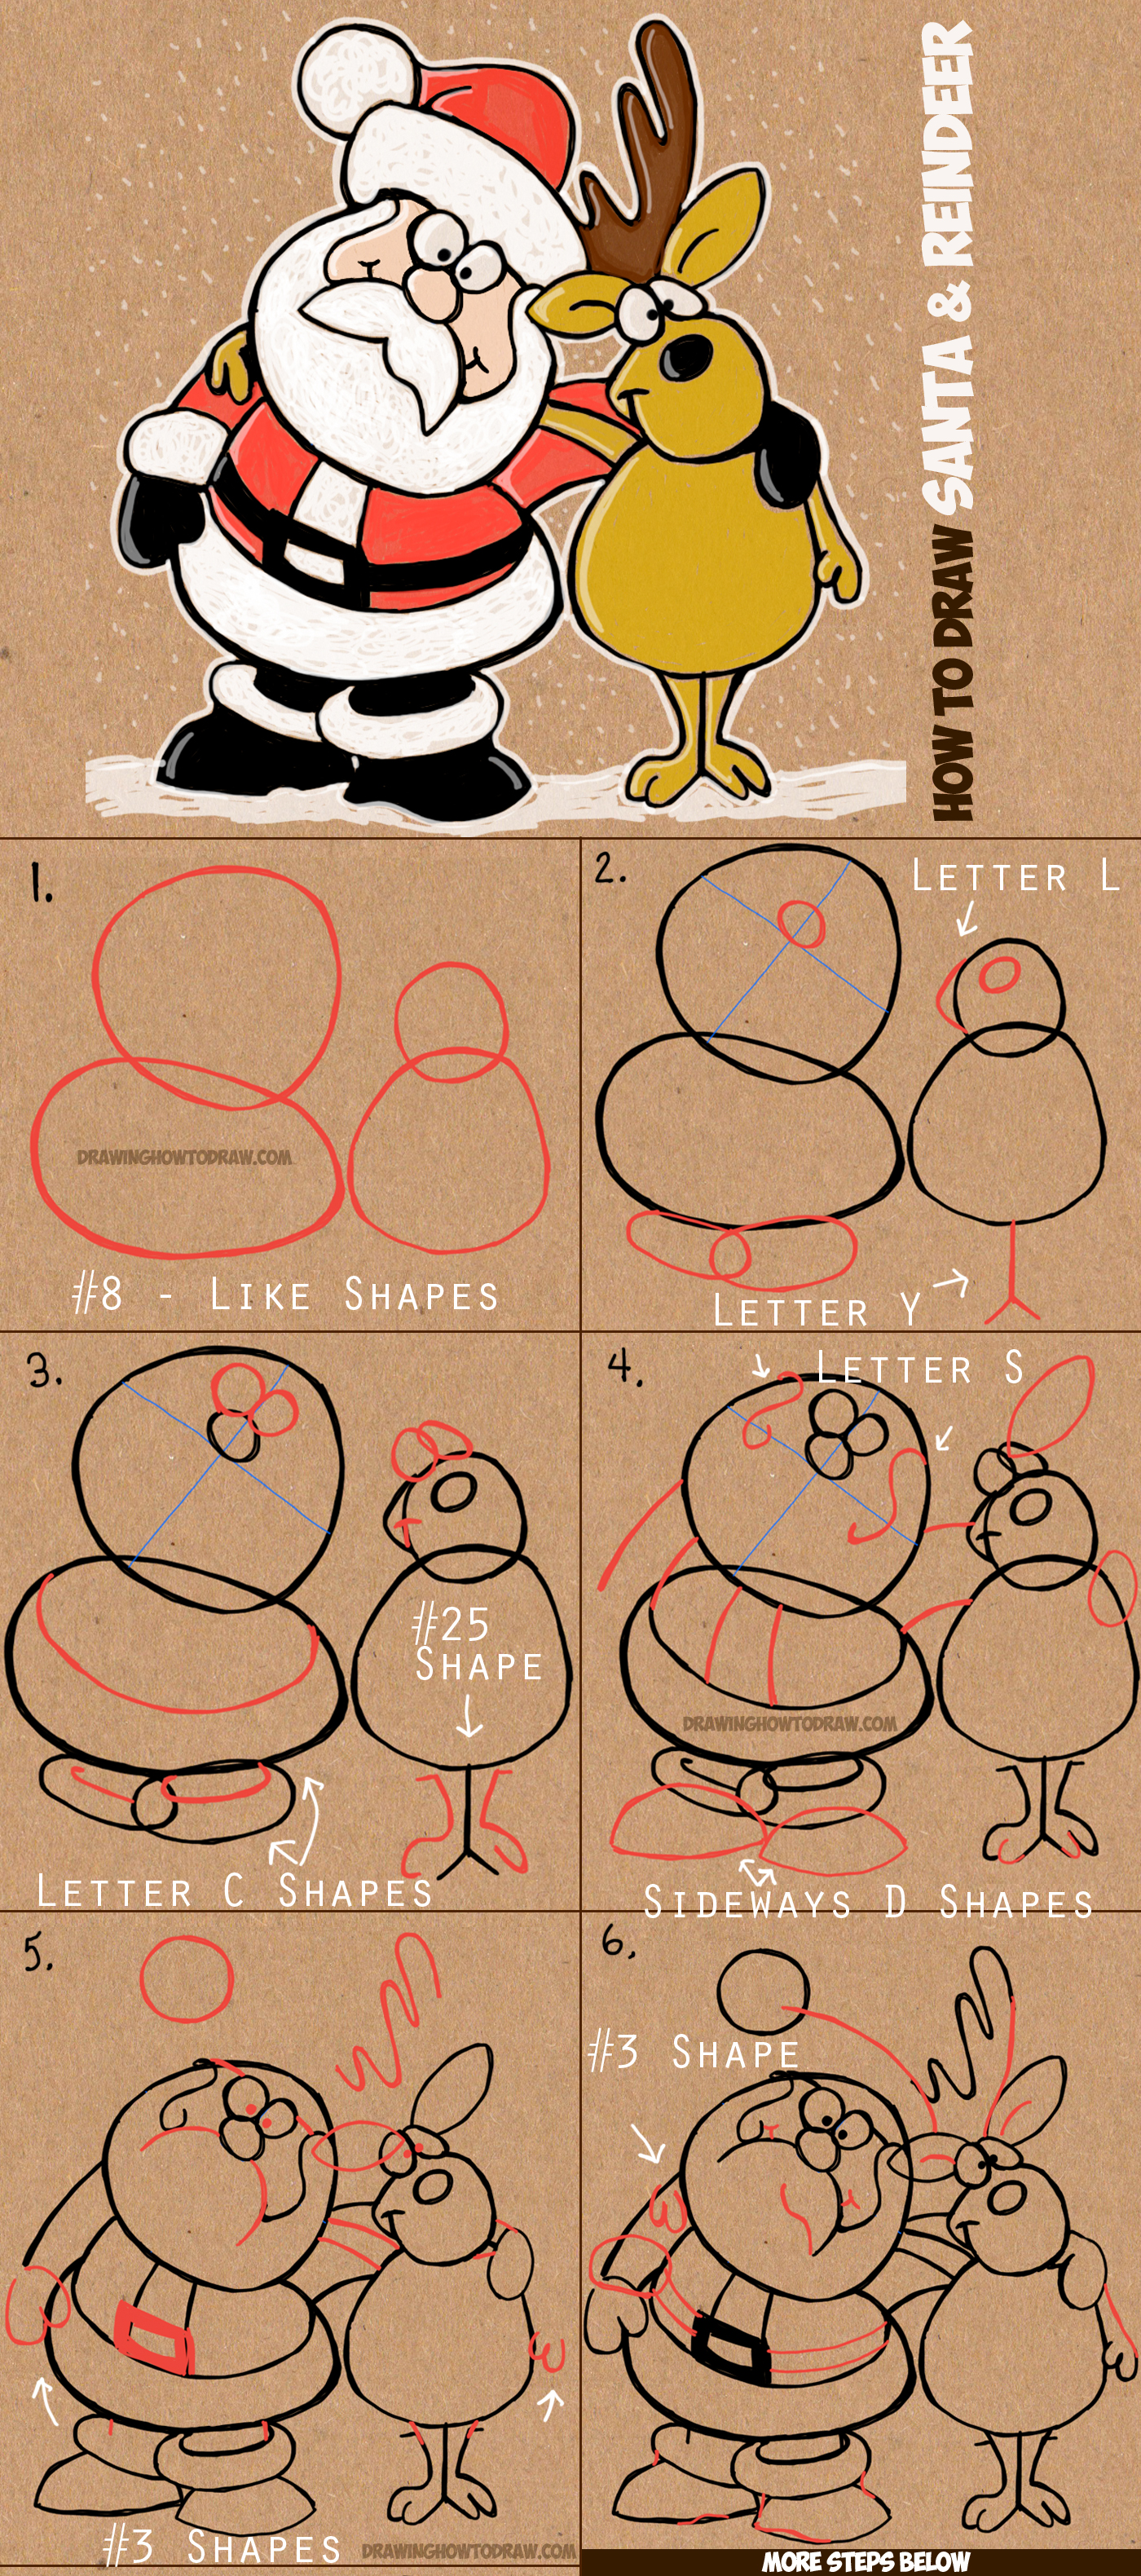 How to Draw Cartoon Santa Claus and Reindeer Simple Step by Step Drawing Lesson